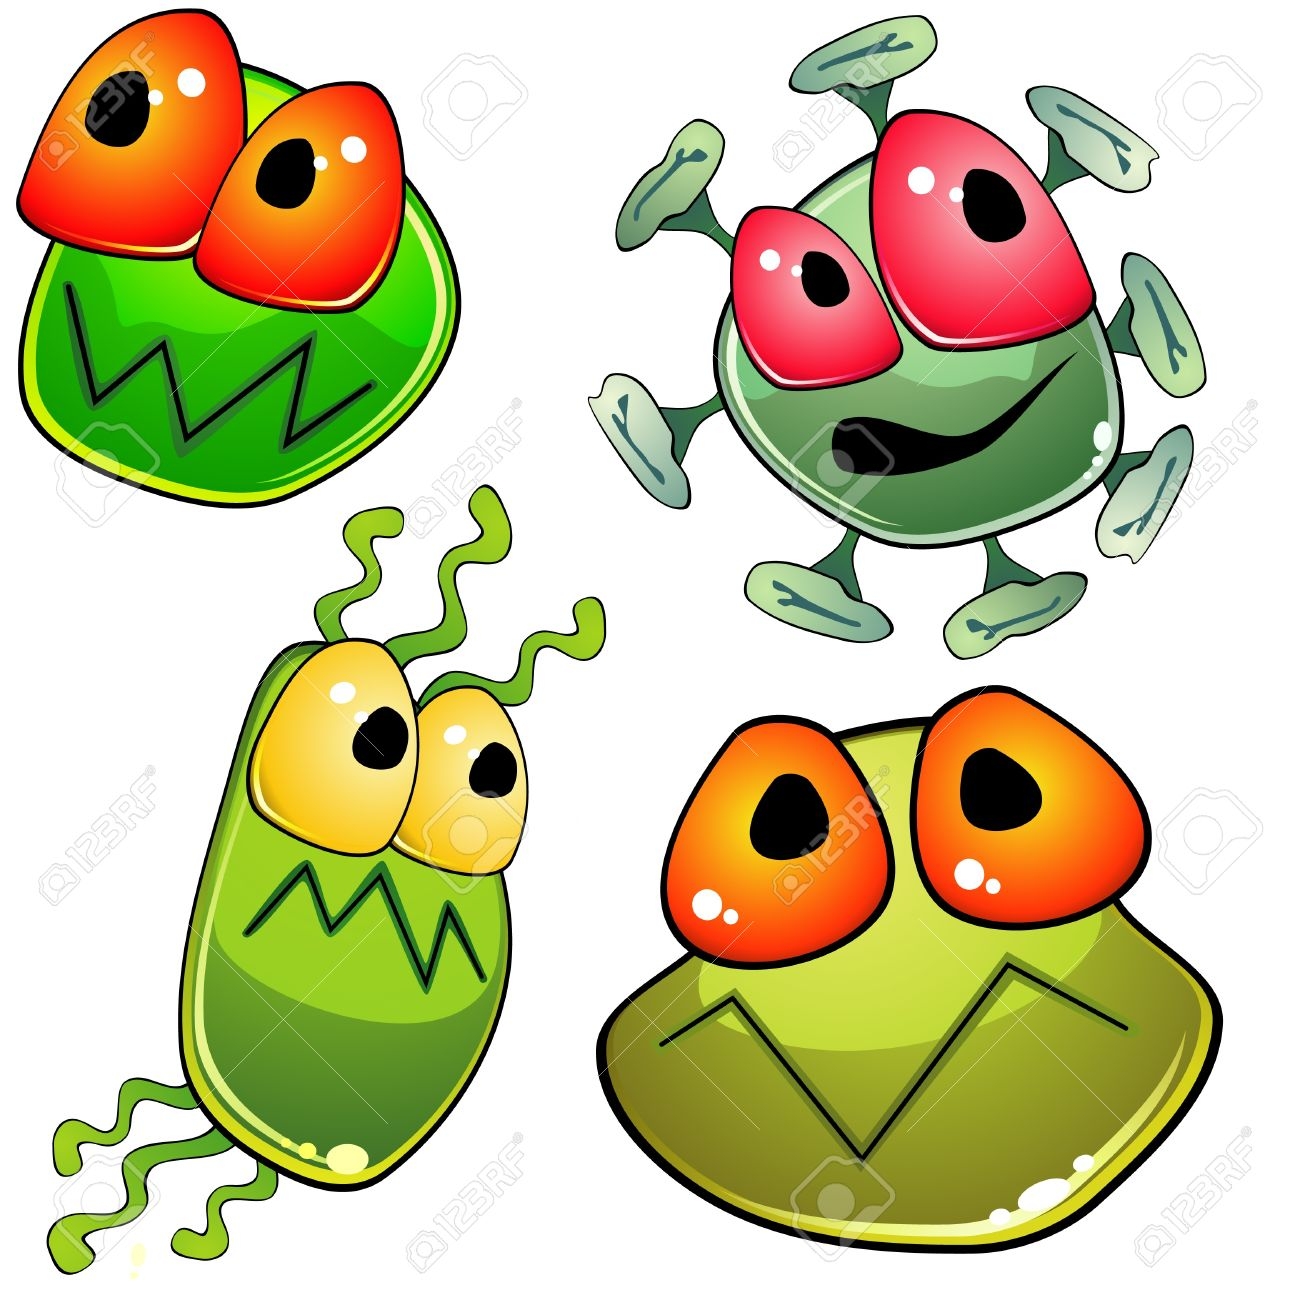 Bacteria clipart microbiology. New design digital collection